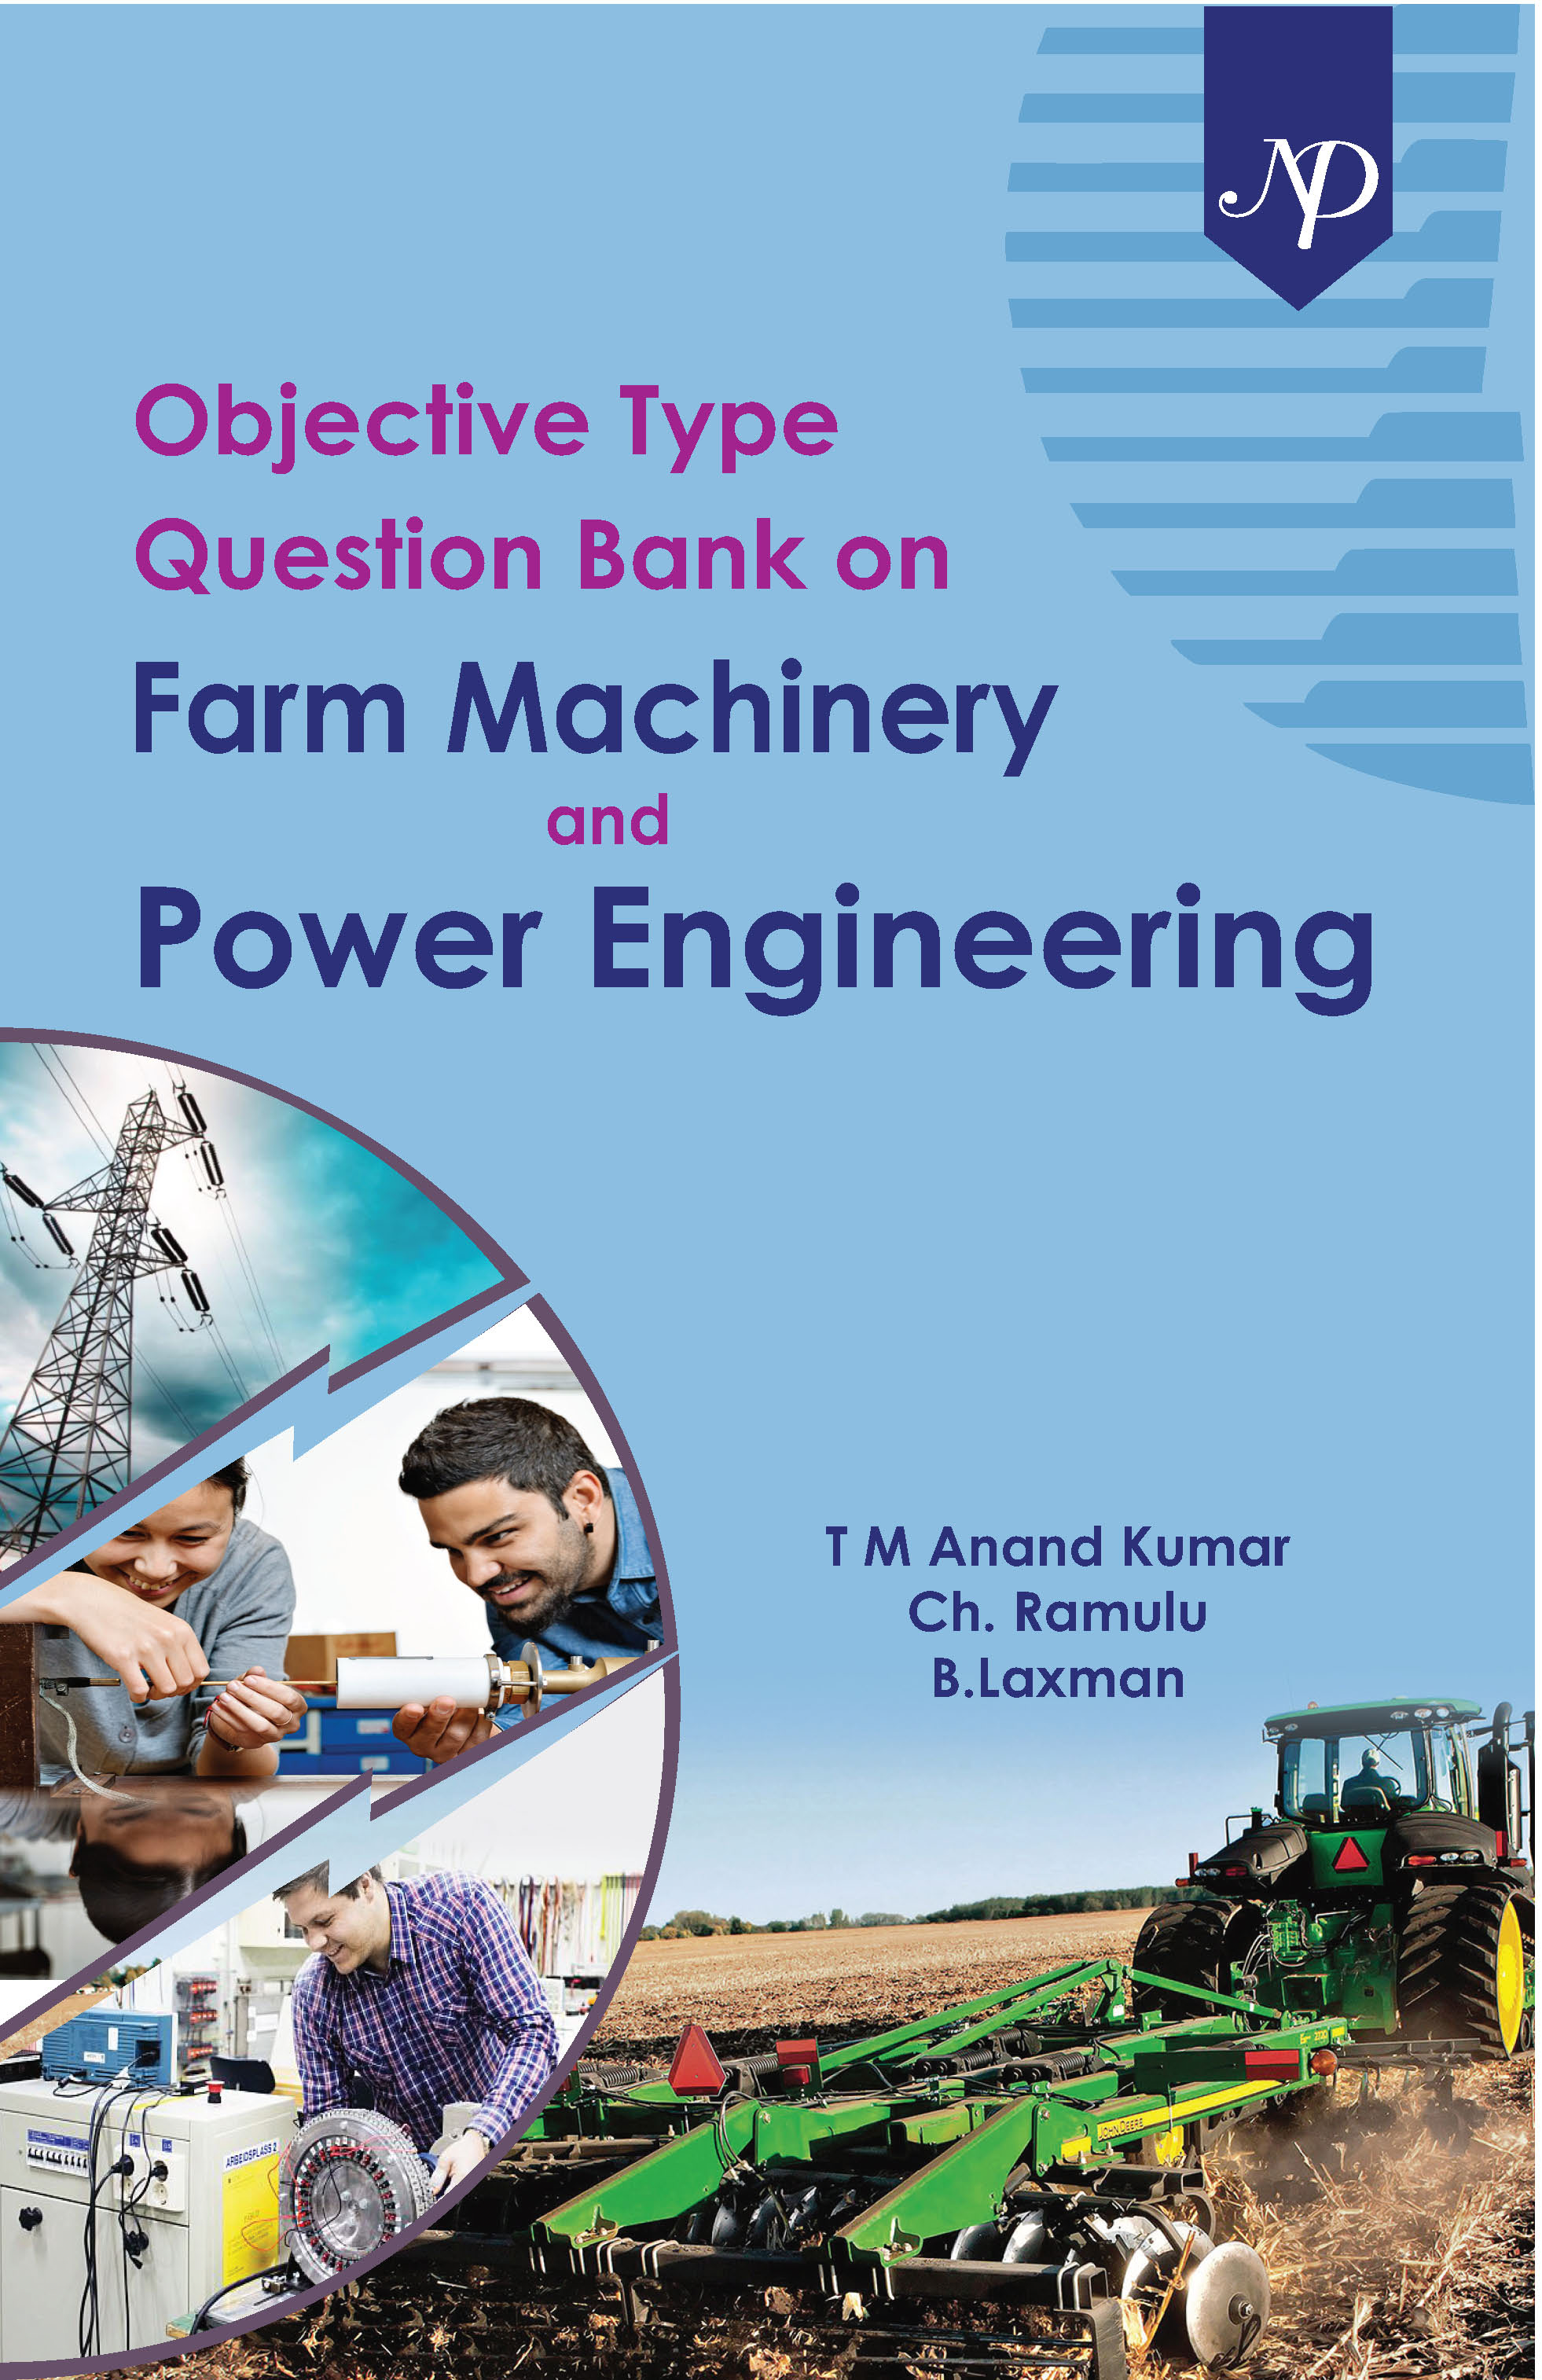 Objective Type Question Bank farm machinery and power engineering.jpg